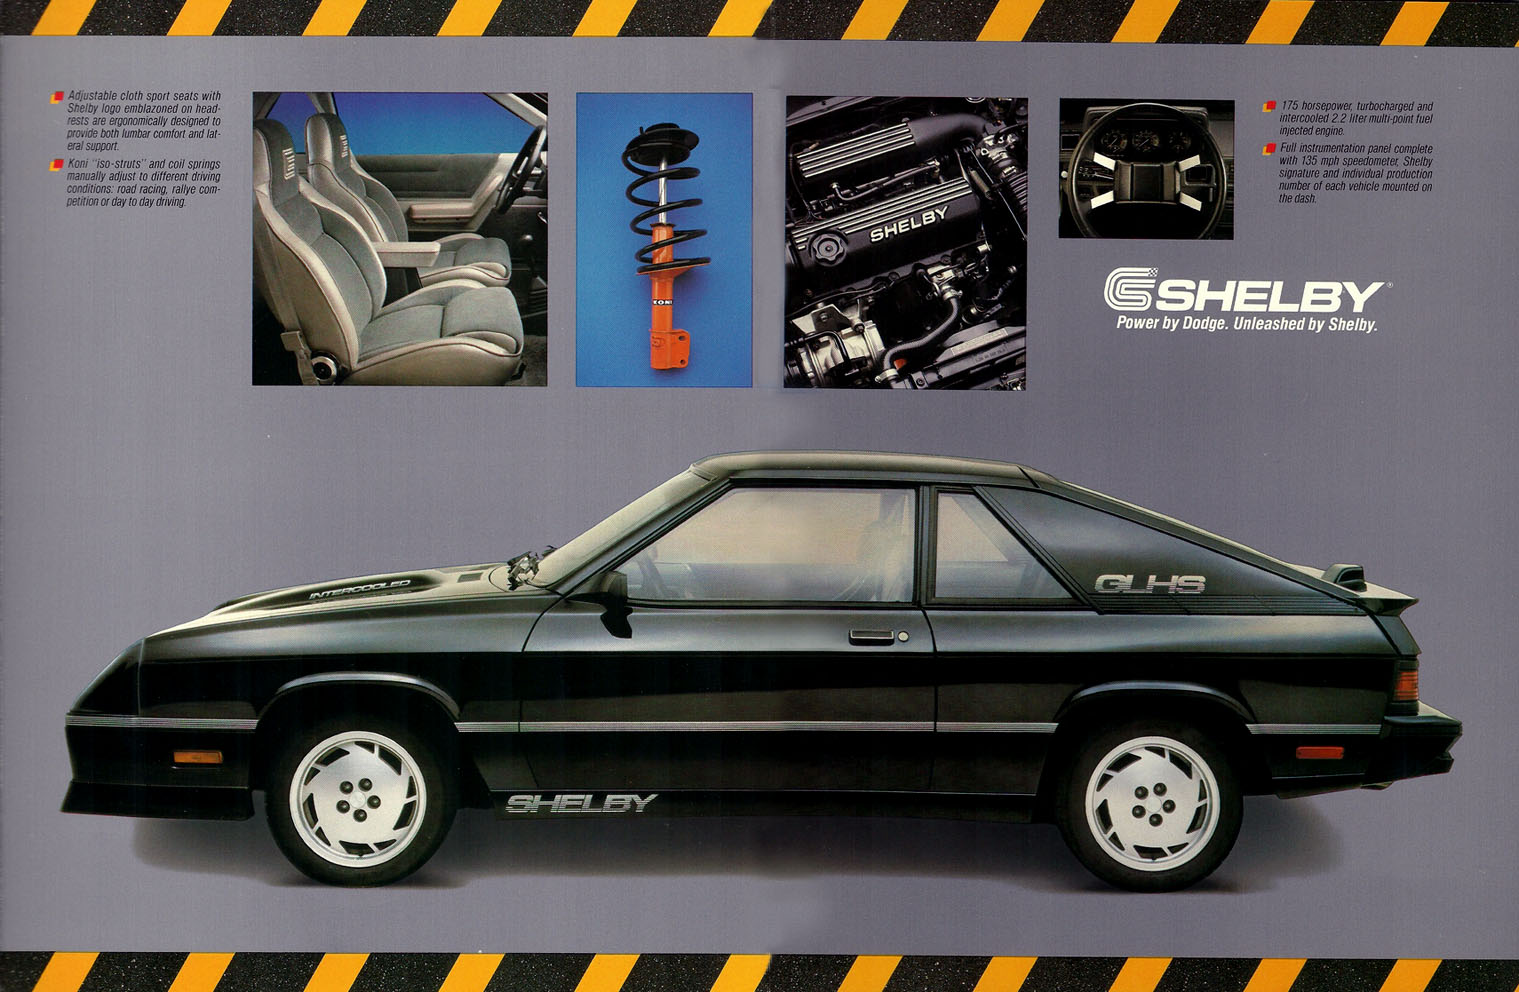 n_1987 Dodge Shelby Charger-04-05.jpg